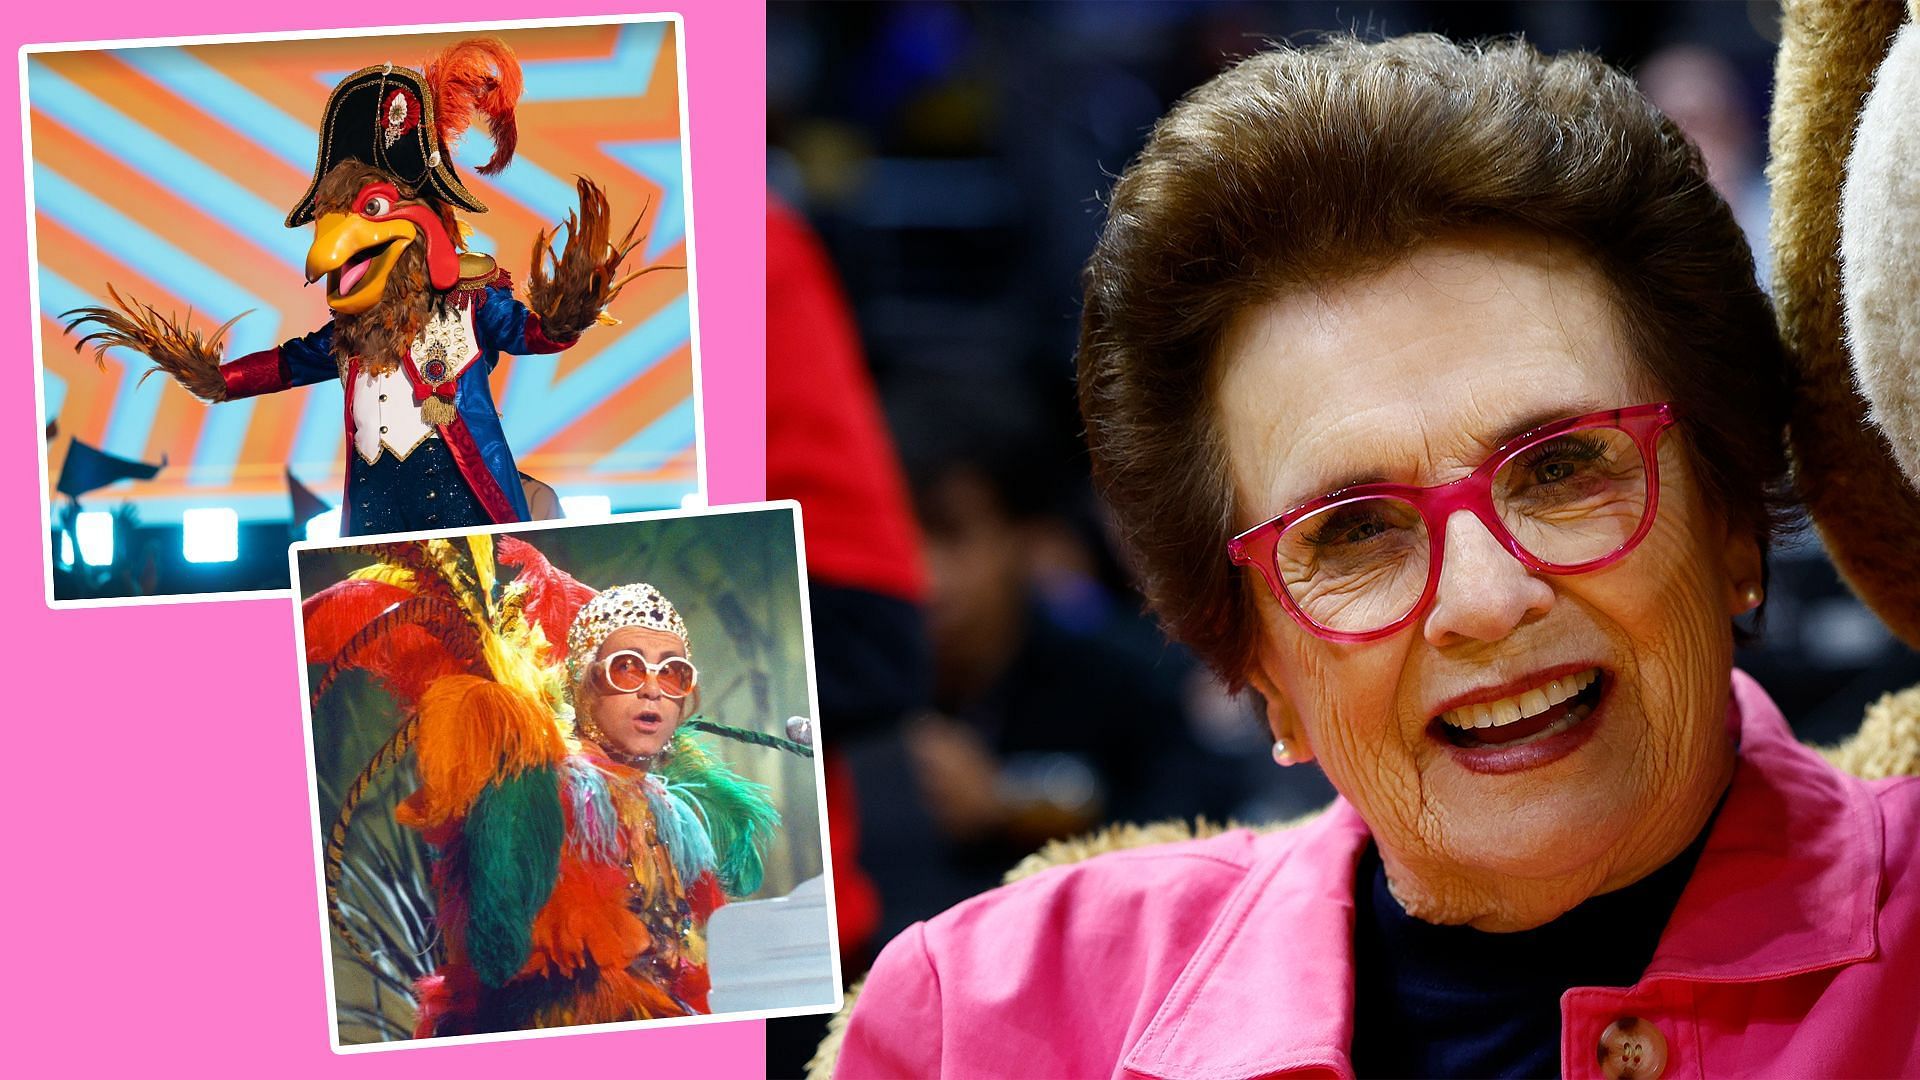 Billie Jean King ('The Masked Singer' Royal Hen) unmasked interview: I was  'really lucky' to have Elton John write 'Philadelphia Freedom' for me